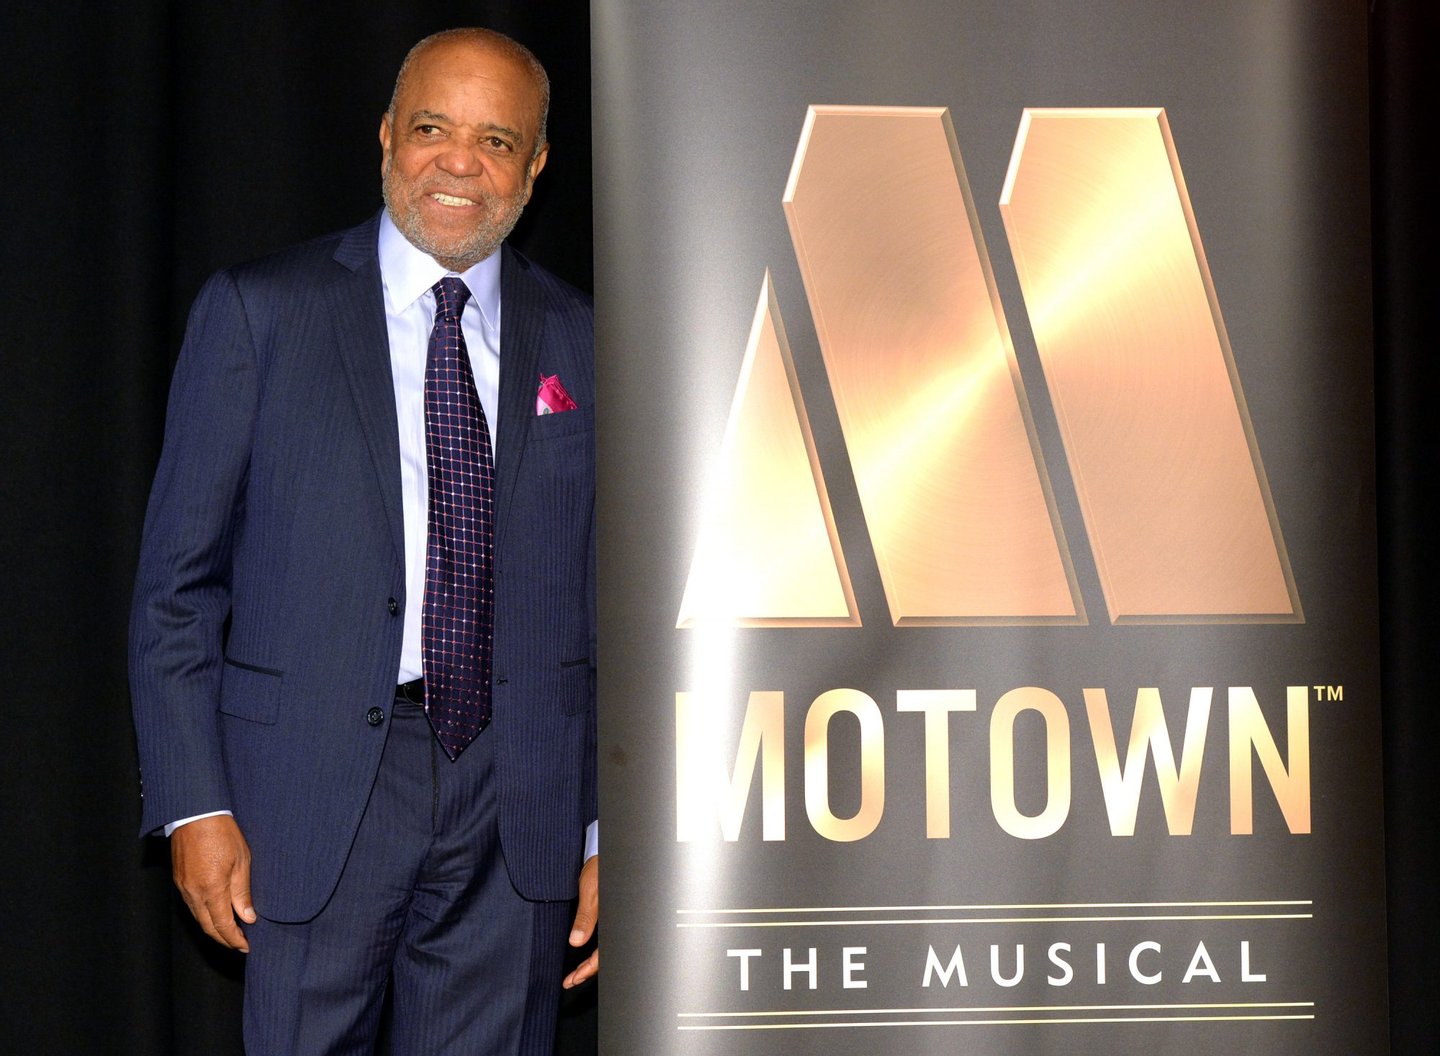 LONDON, ENGLAND - OCTOBER 05: Berry Gordy attends a photocall for "Motown - The Musical" at The Hospital Club on October 5, 2015 in London, England. (Photo by Anthony Harvey/Getty Images)